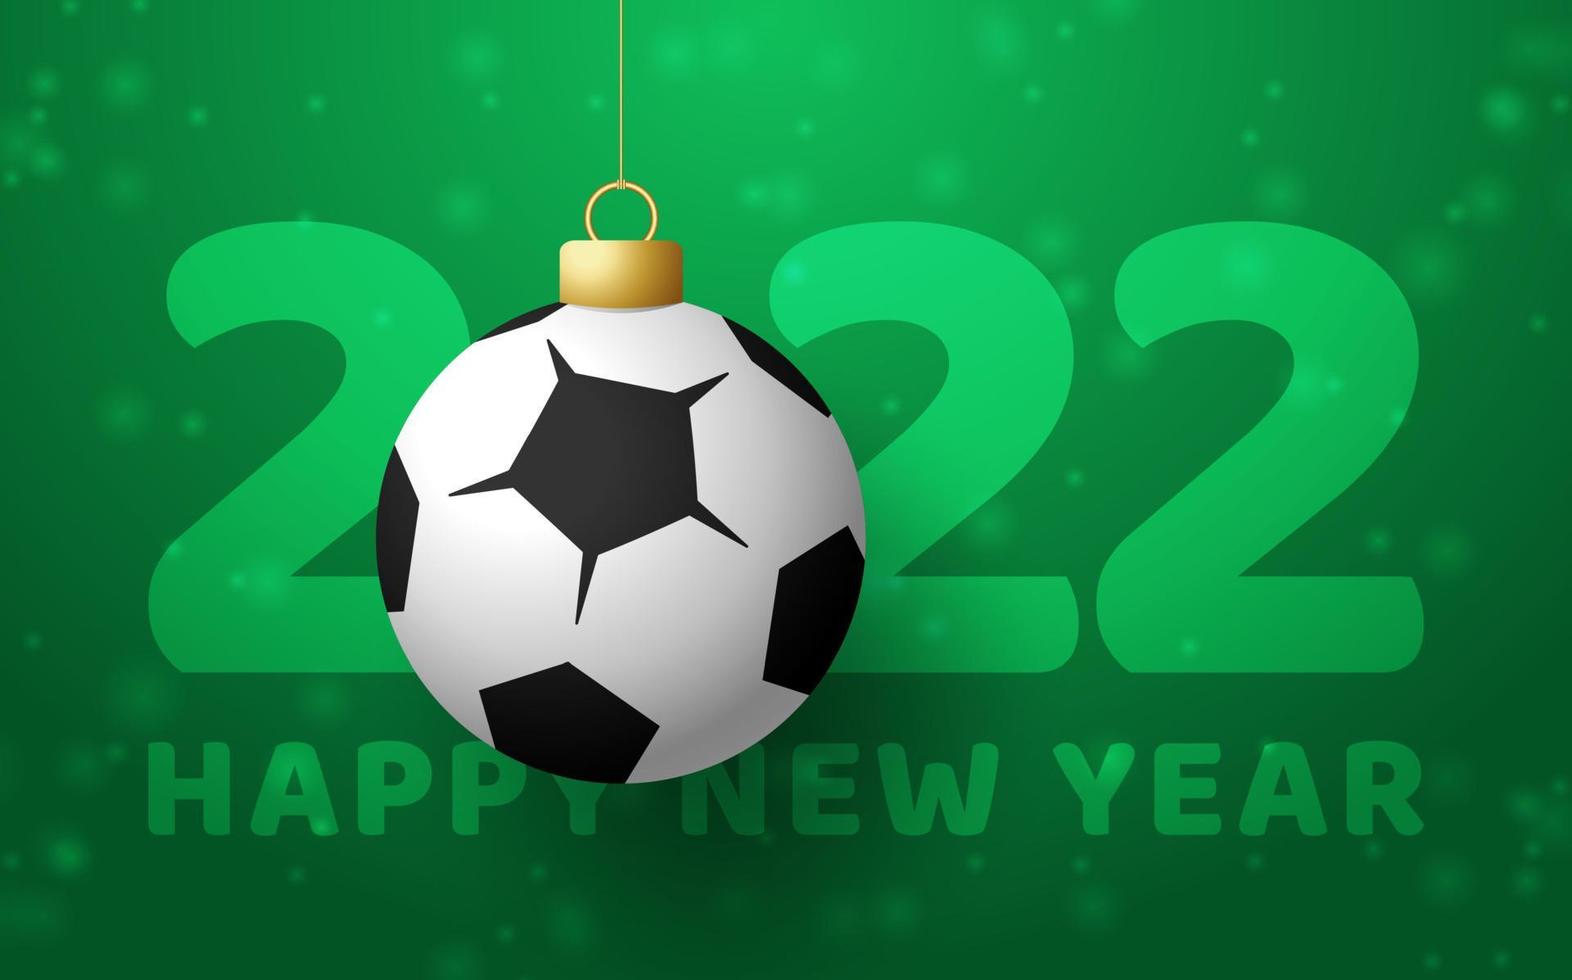 2022 Happy New Year. Sports greeting card with a soccer football ball on the luxury background with snowflake. Vector illustration.